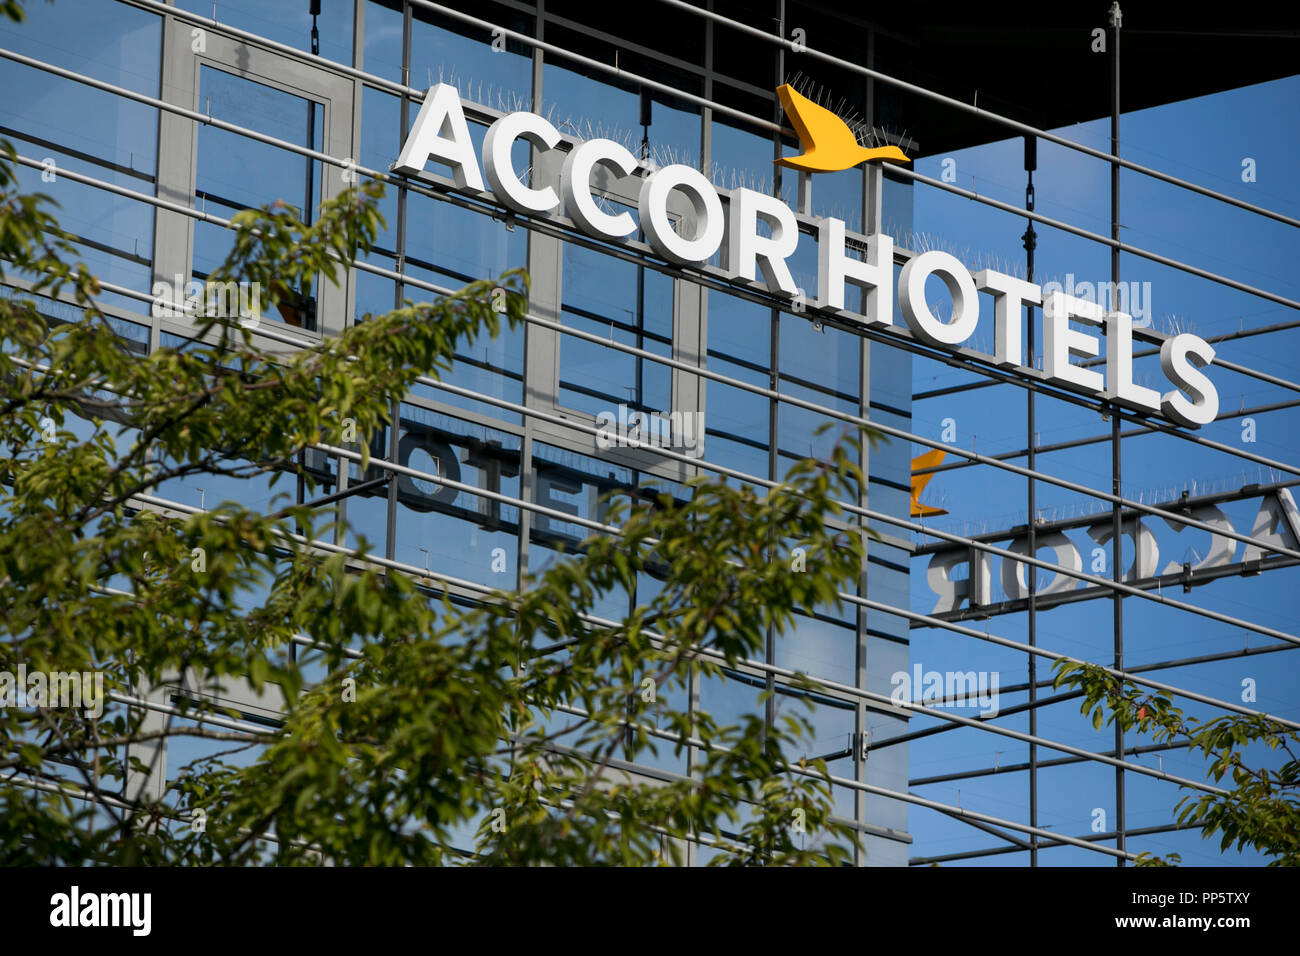 Page 2 - Accor Hotels High Resolution Stock Photography and Images - Alamy